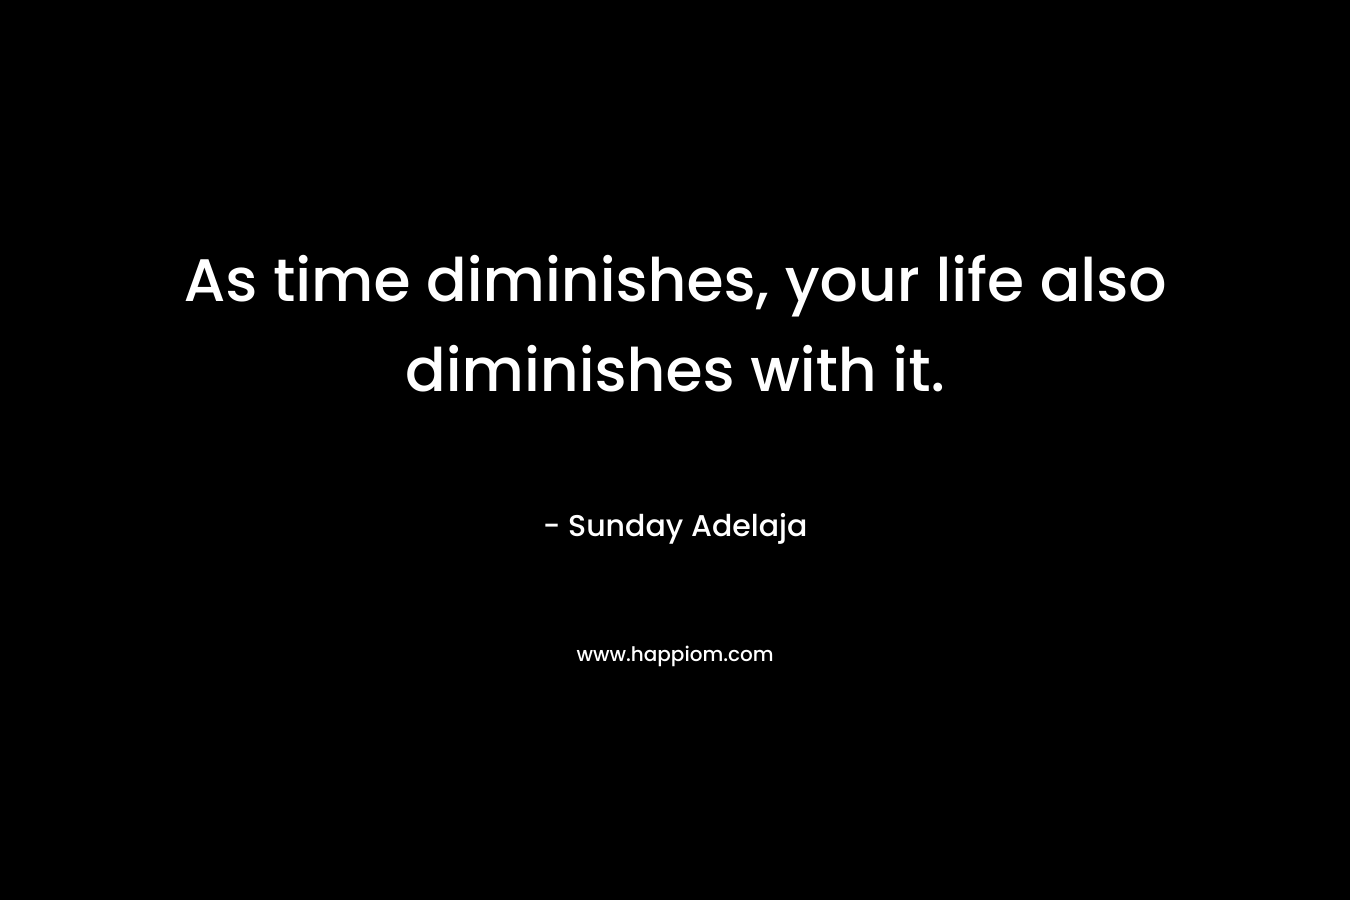 As time diminishes, your life also diminishes with it.